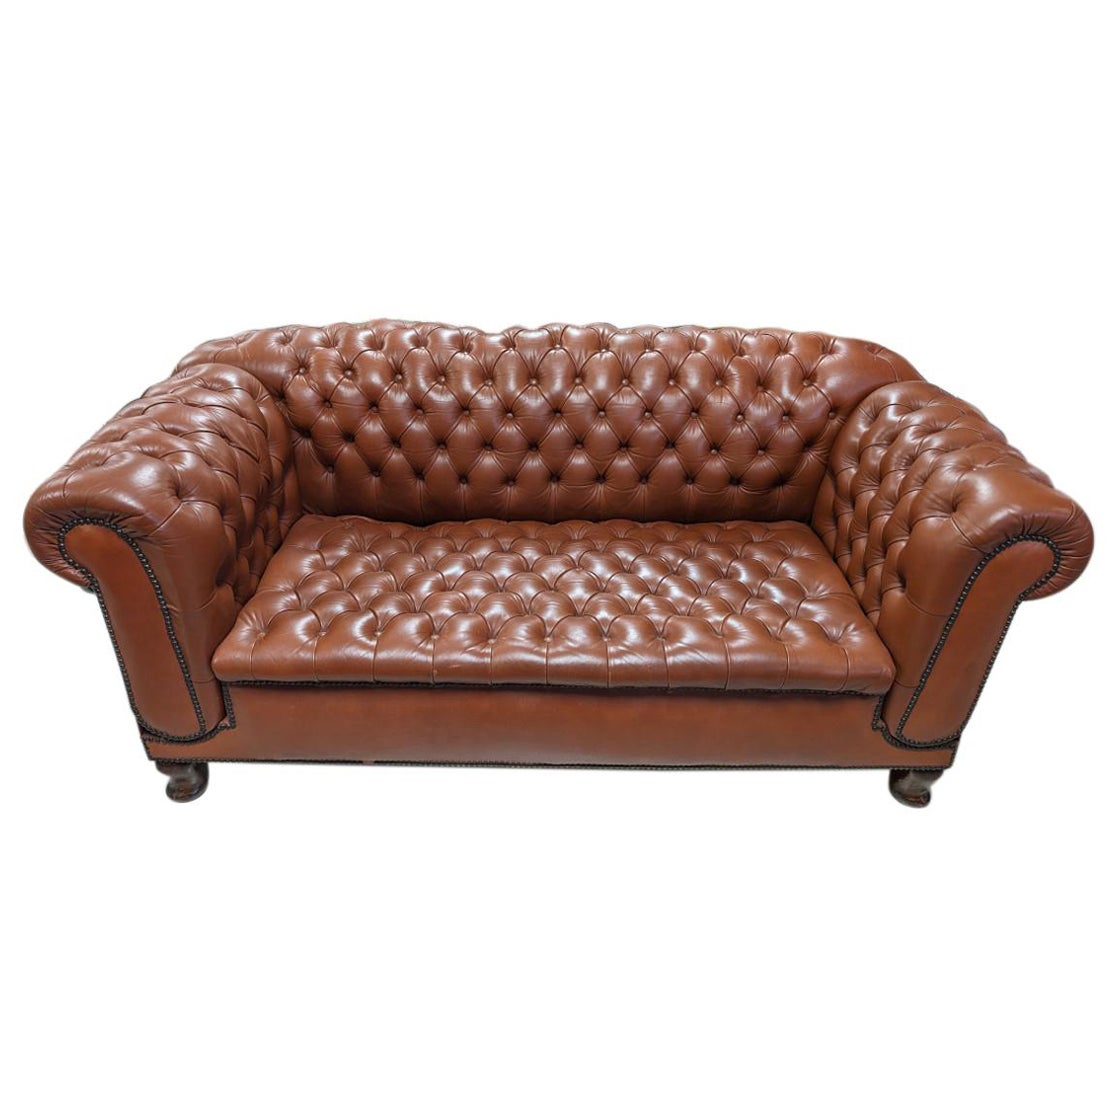 Vintage Chesterfield Style Leather Knoll Settee, Sofa